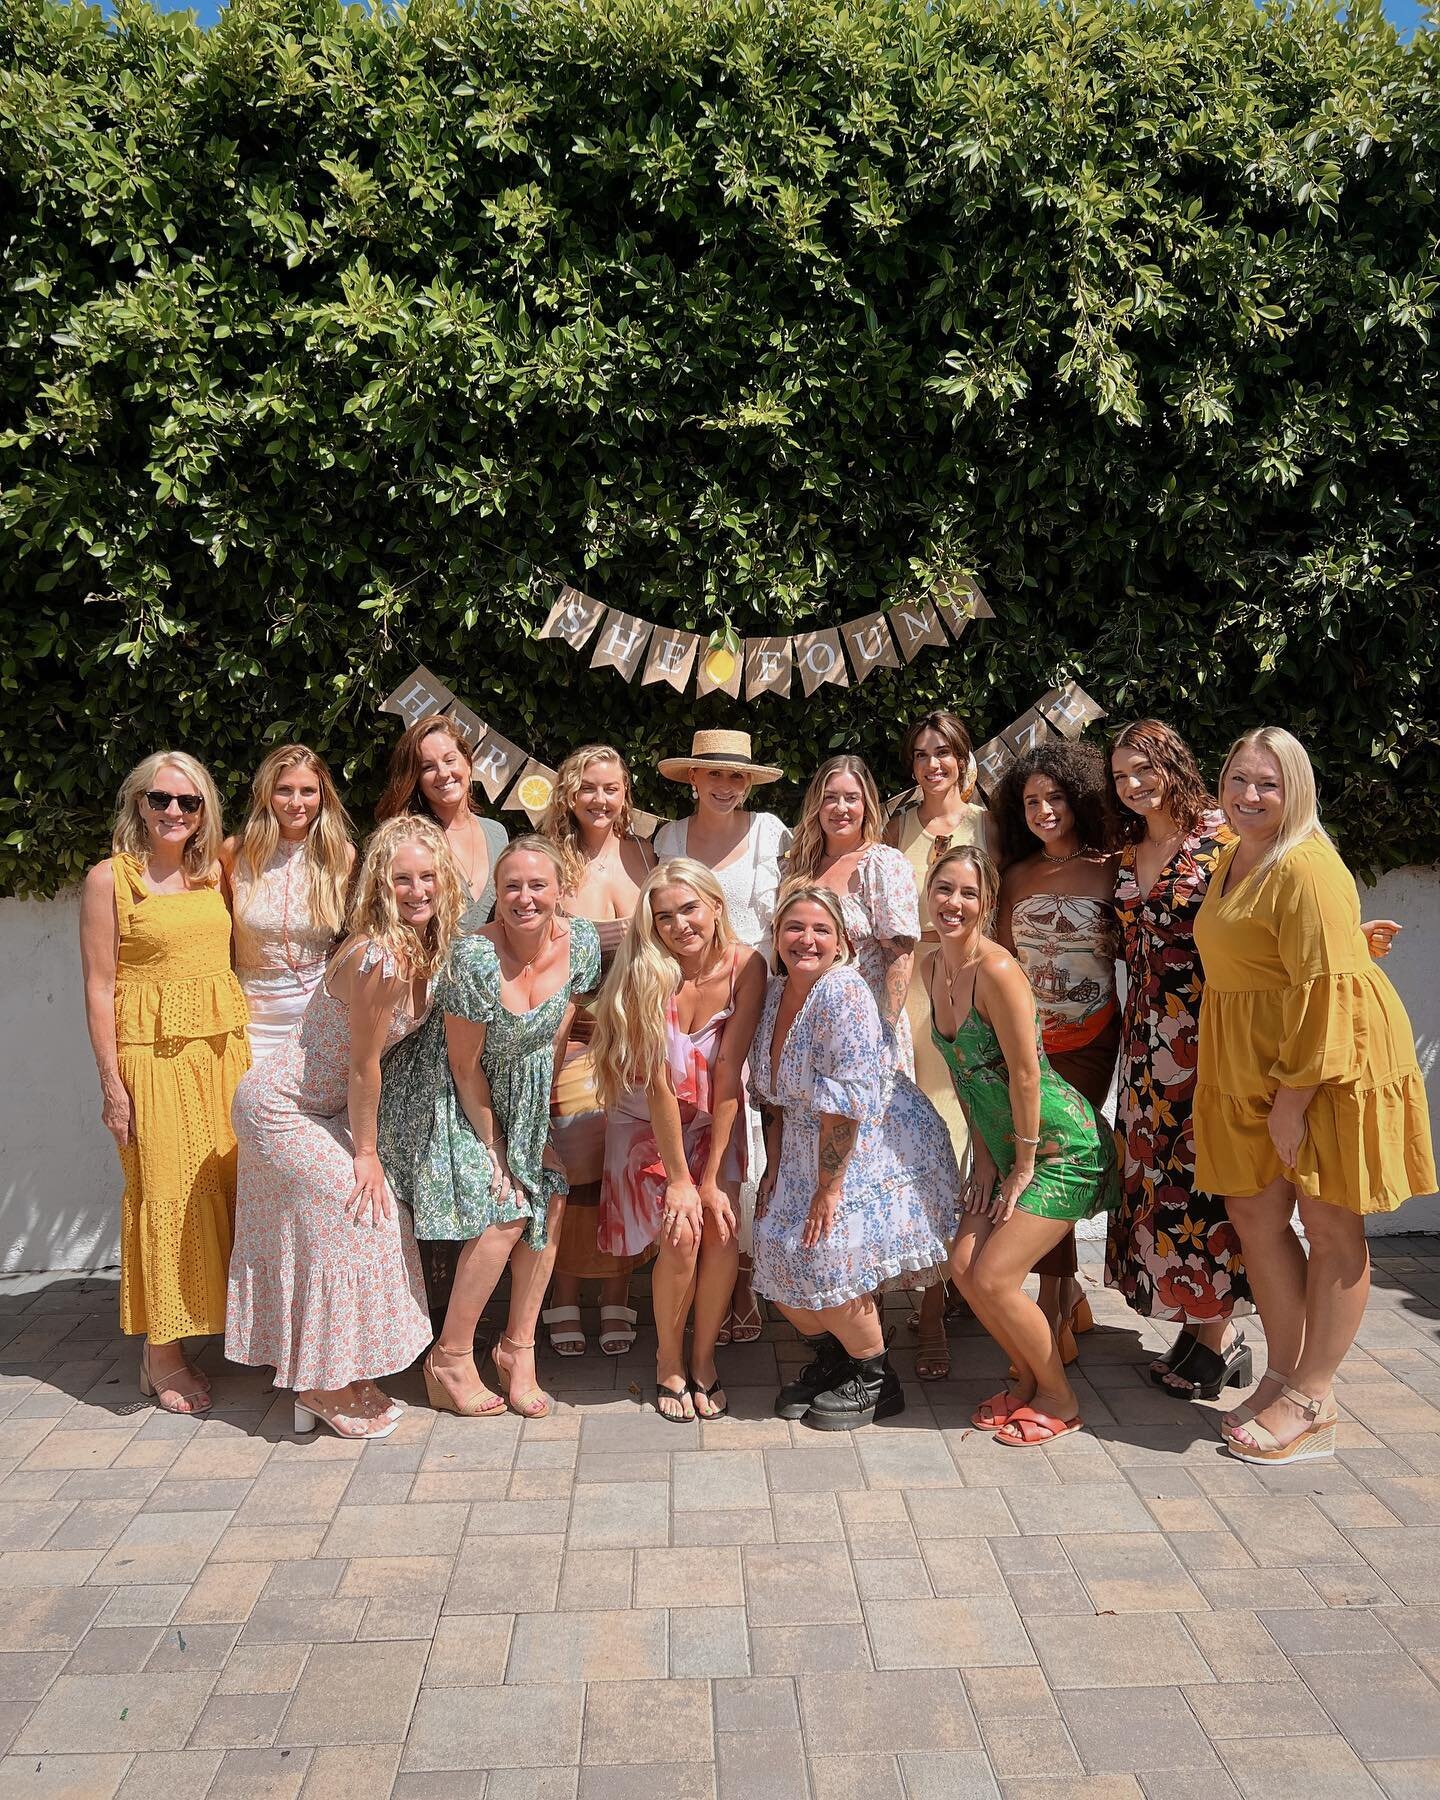 Taking all these sweet moments with me forever💛🍋🌞
.
.
.
#bridalshower #sograteful #happiness #blessedlife #bestfriends #luckylady #cherisheverymoment